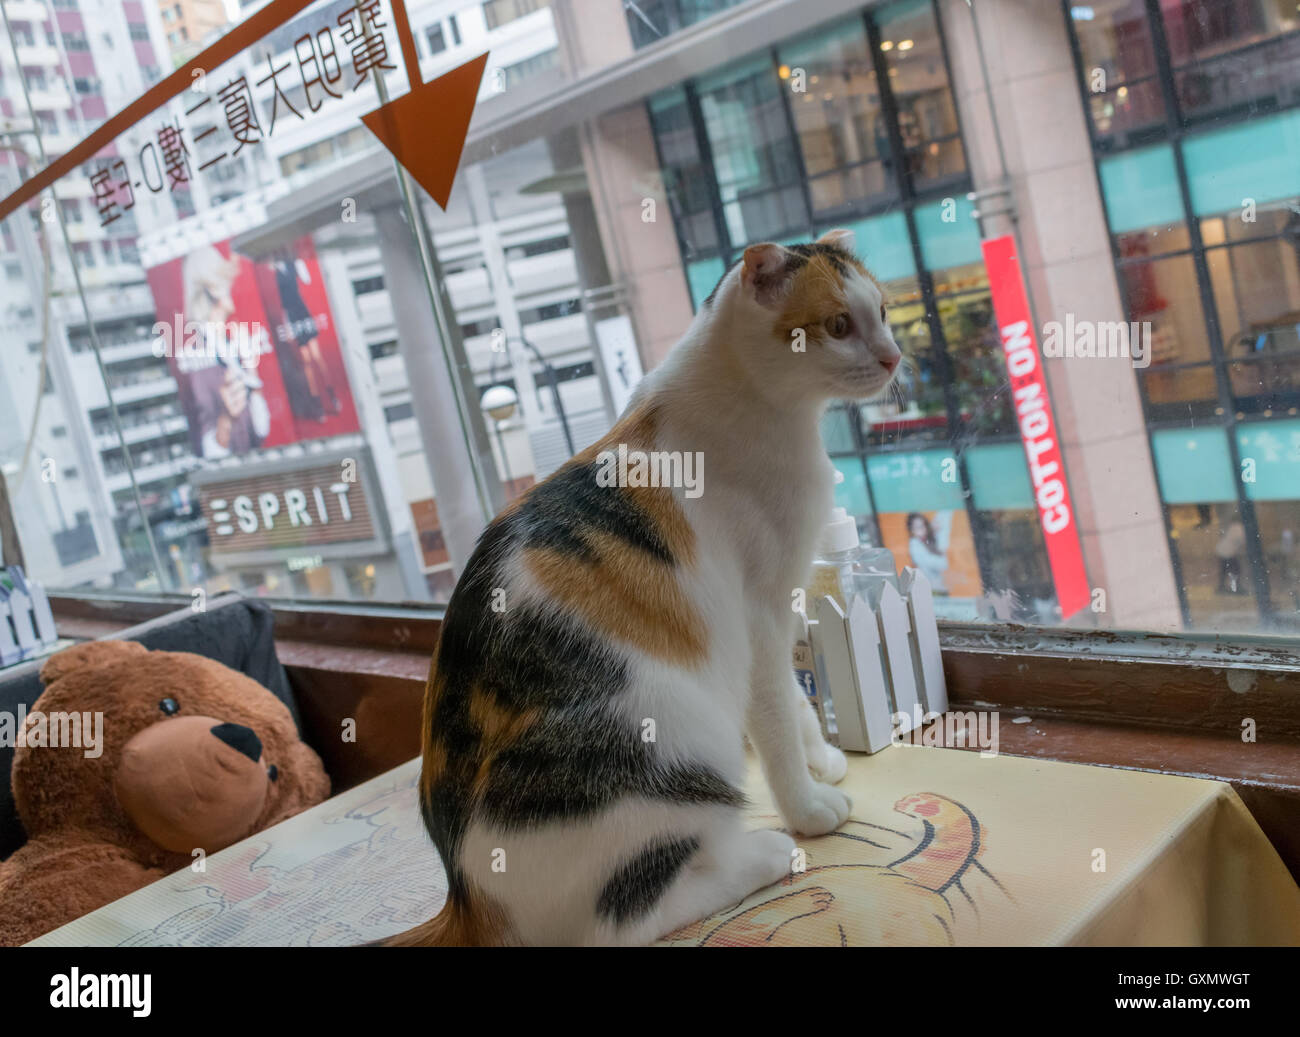 Gatta calico a cat cafe con Teddy bear in background in Hong Kong Foto Stock